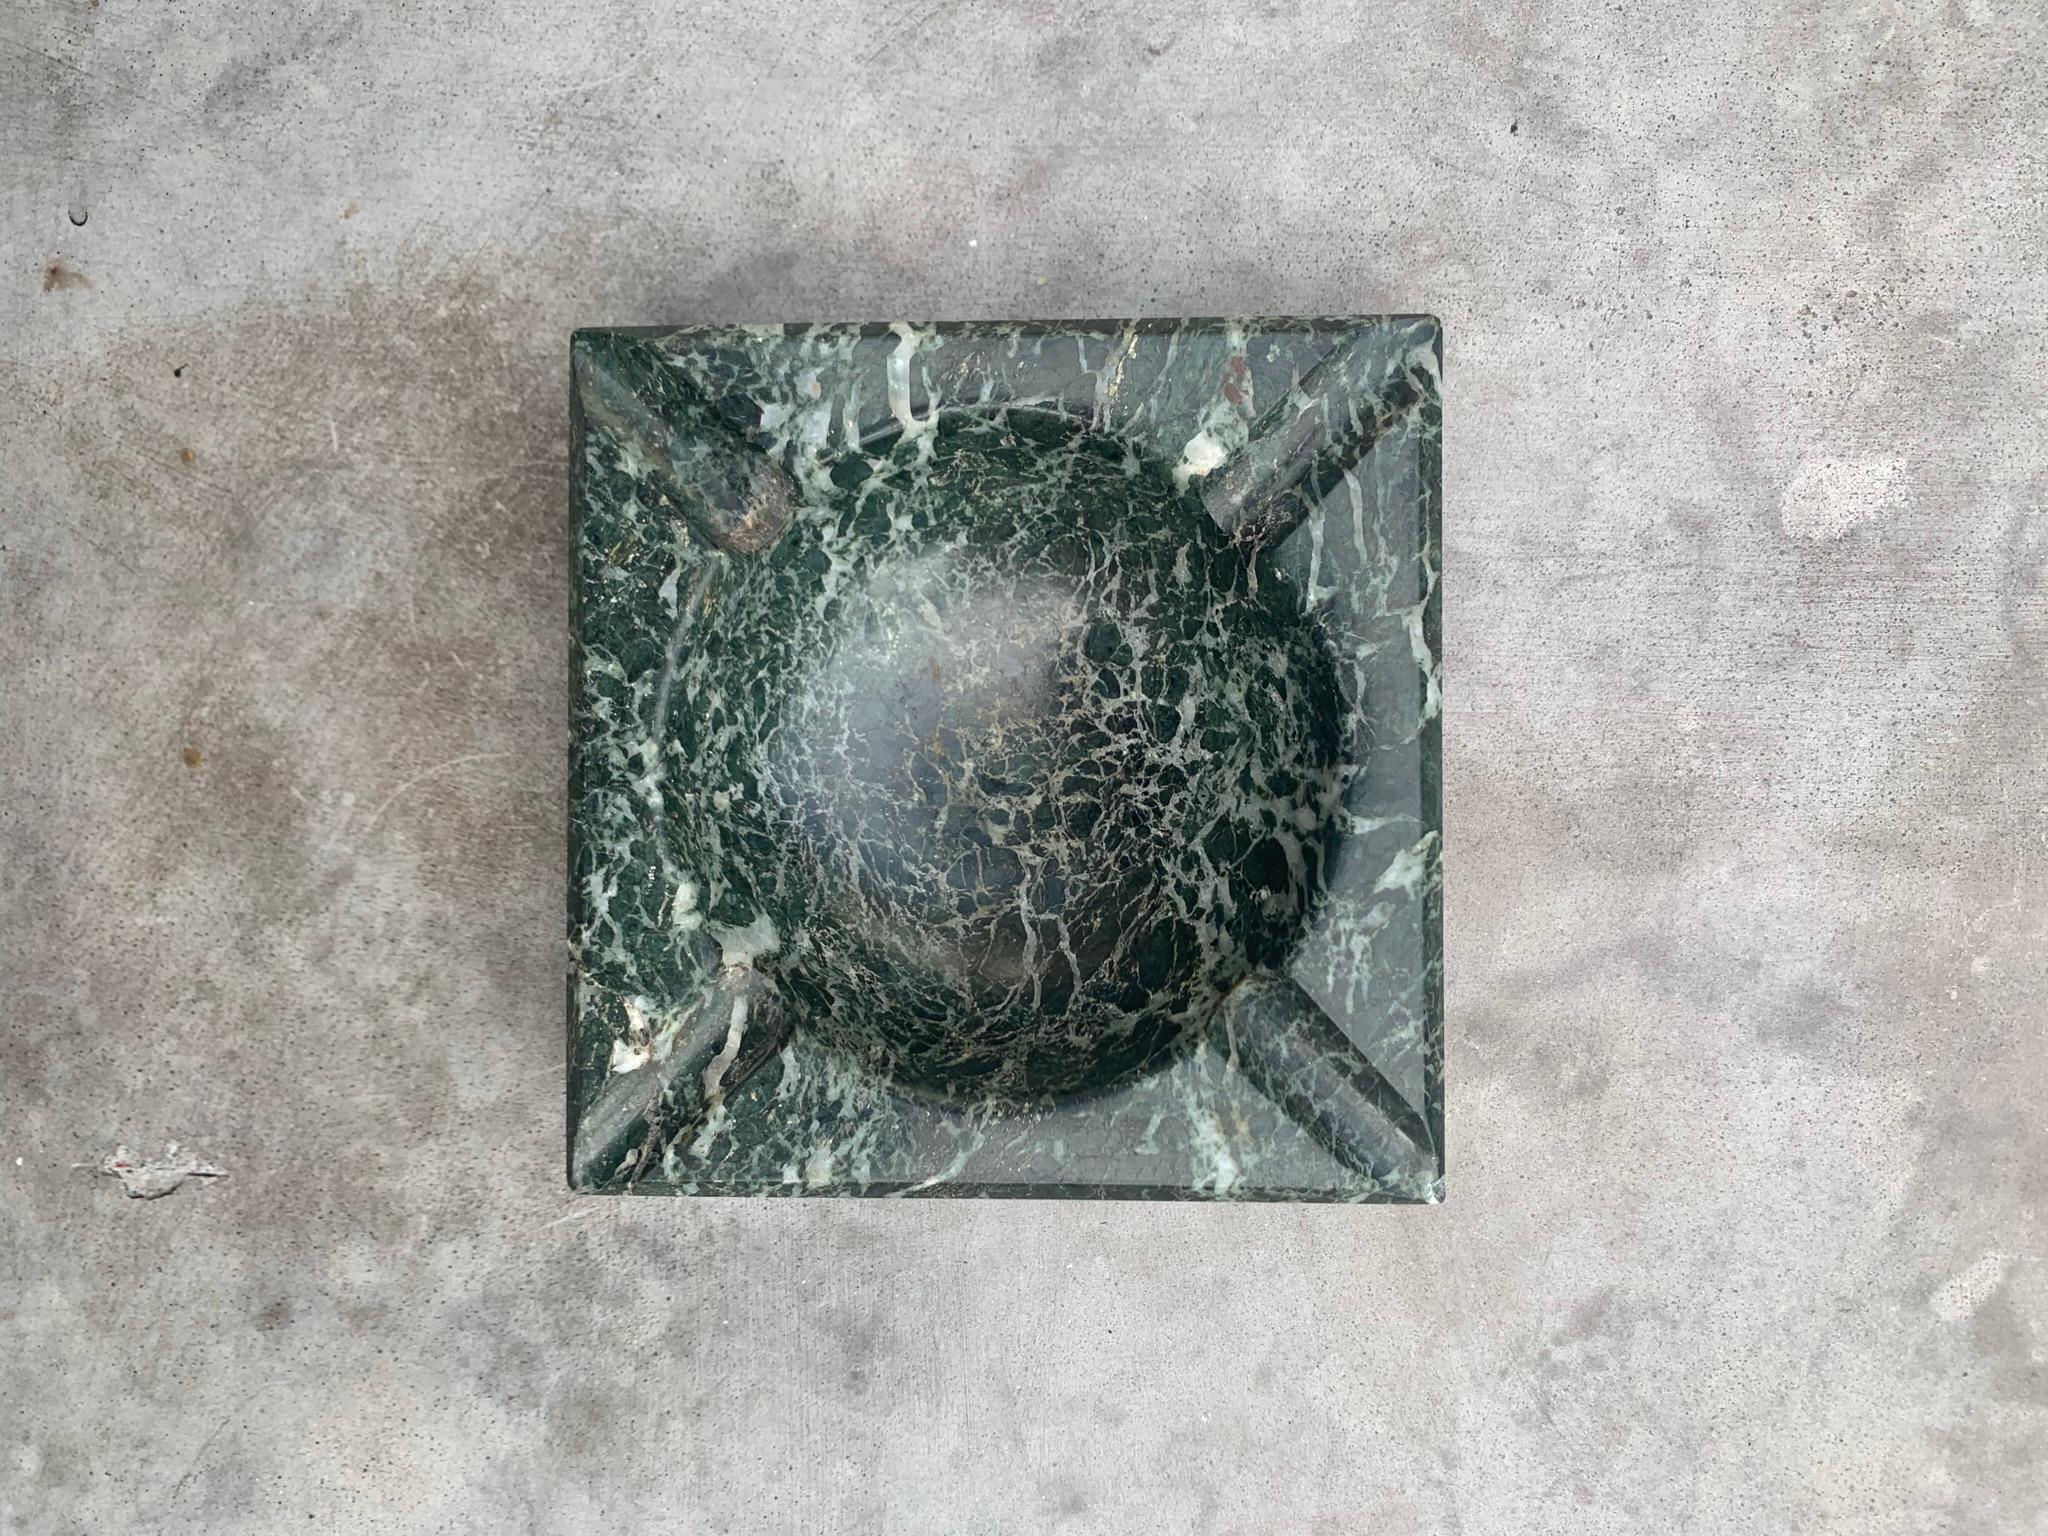 A rare vintage Italian marble ashtray in pine green with intricate dove gray veining, 1960s. Hand -carved in Italy. Minor signs of wear consistent with age and use. 
Dimensions:
5.25” x 5.25” x 1.75”